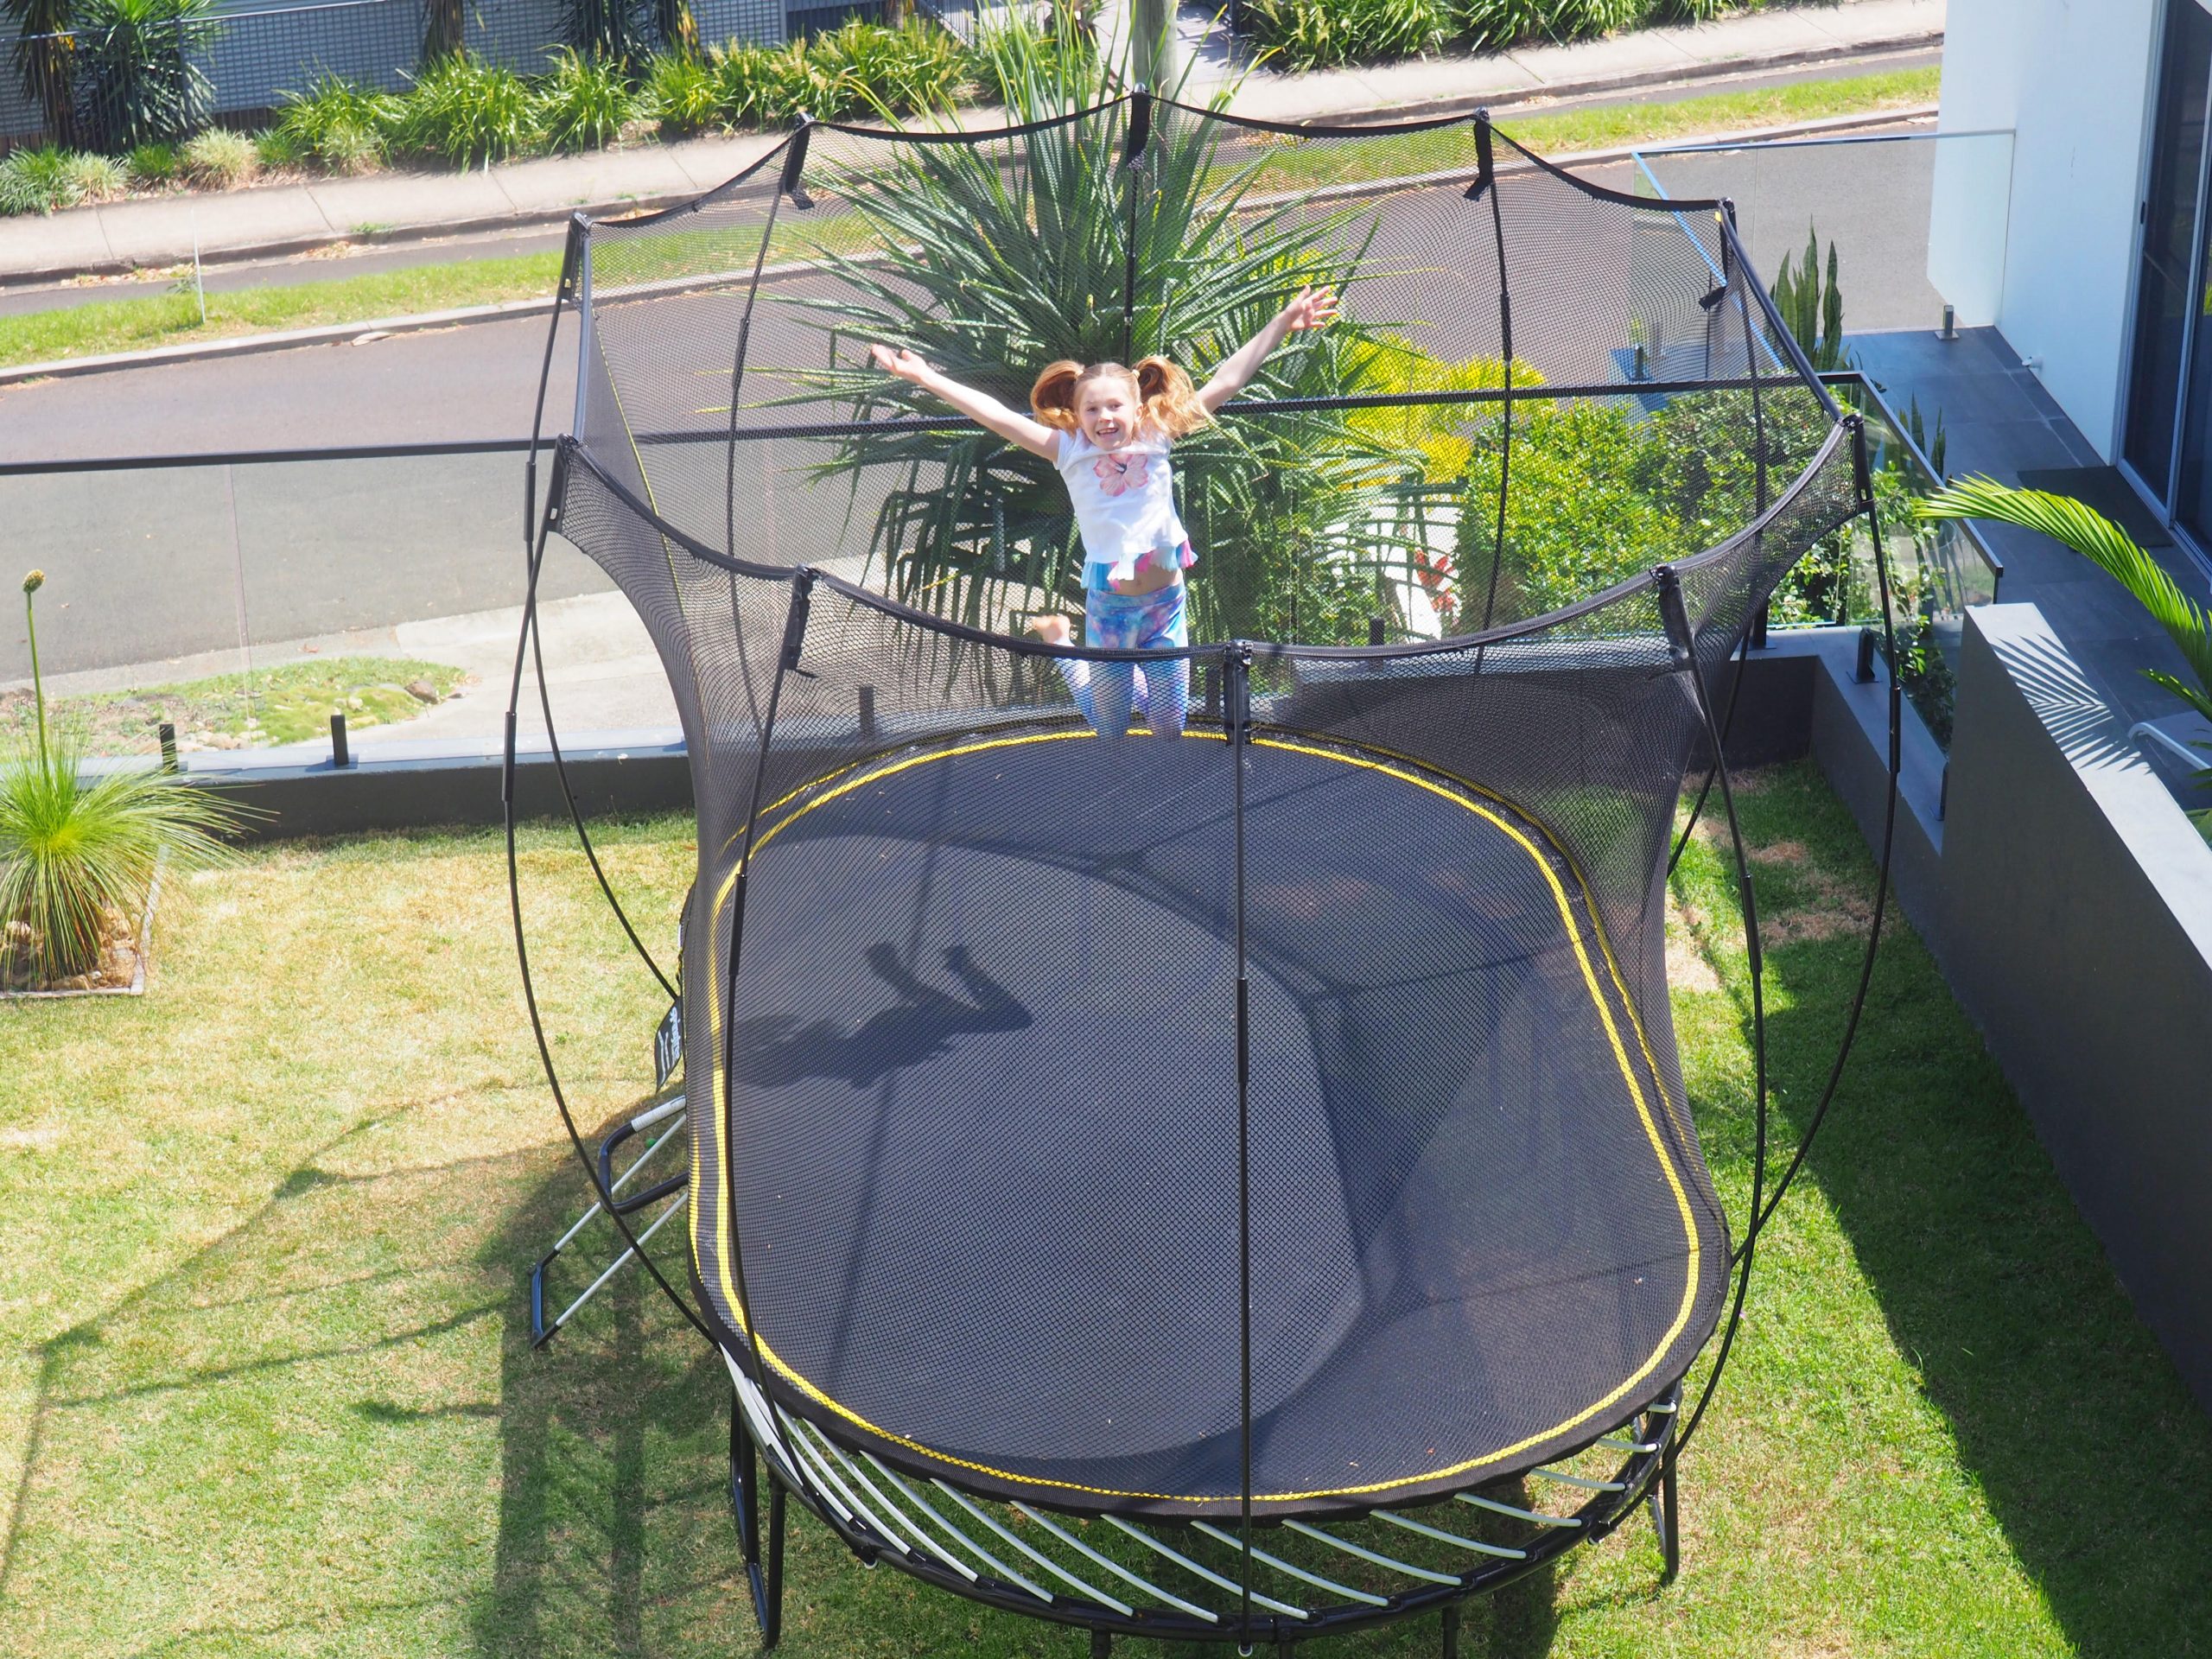 tryk Sky Rodeo Springfree Trampoline Review - Paging Fun Mums